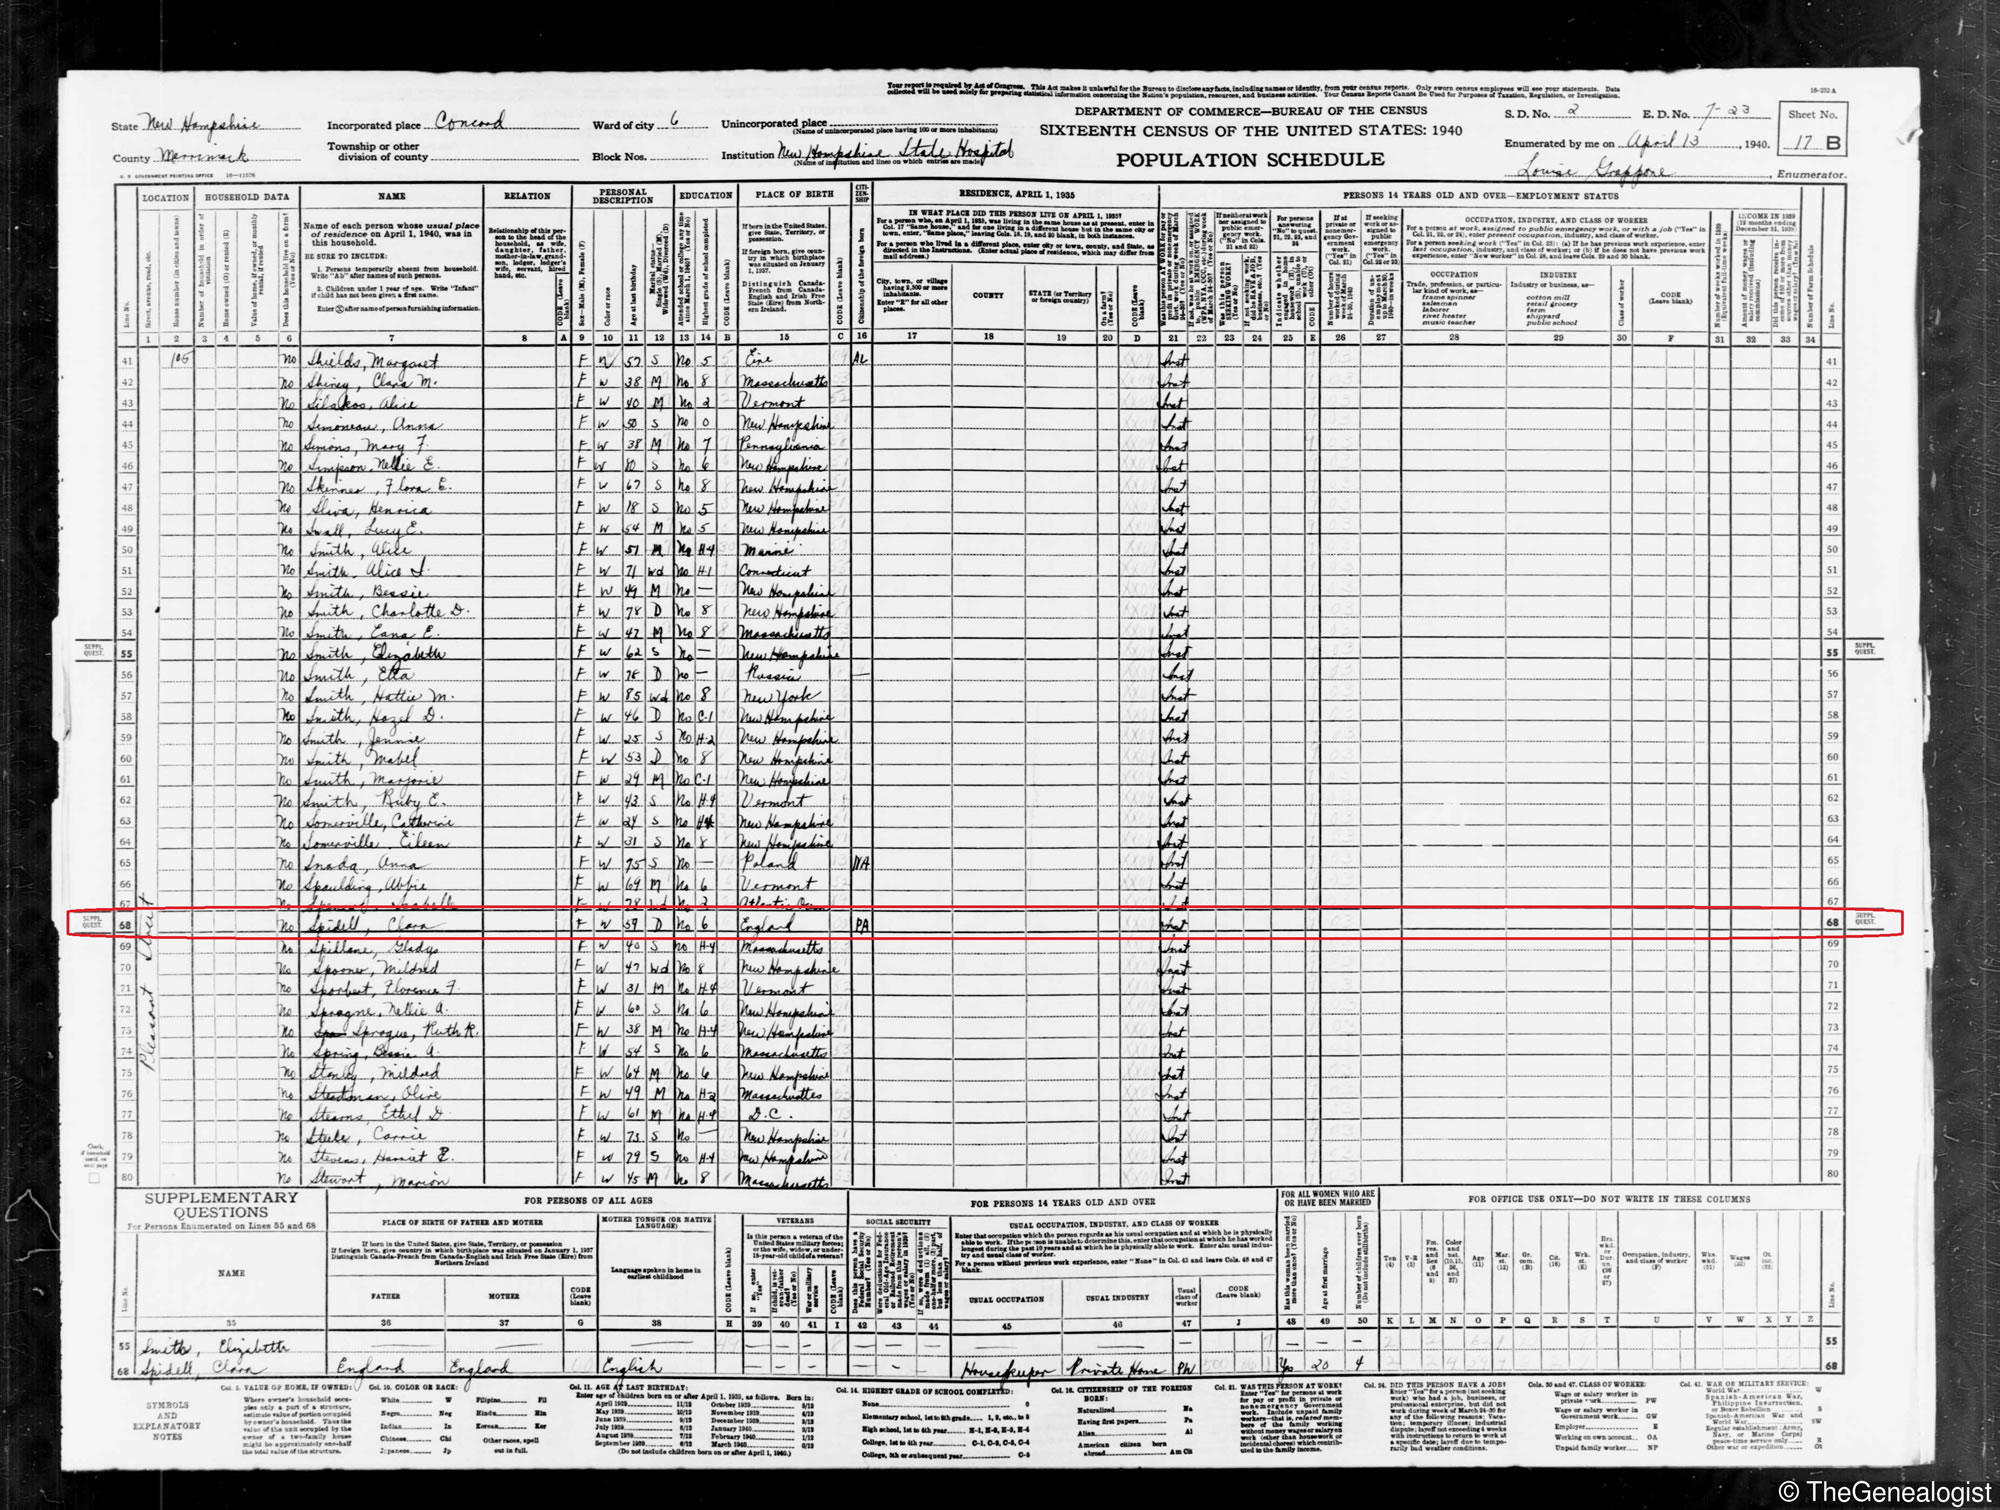 Clara Spidell's entry in the 1940 US census at the New Hampshire State Hospital in Concord, Merrimack